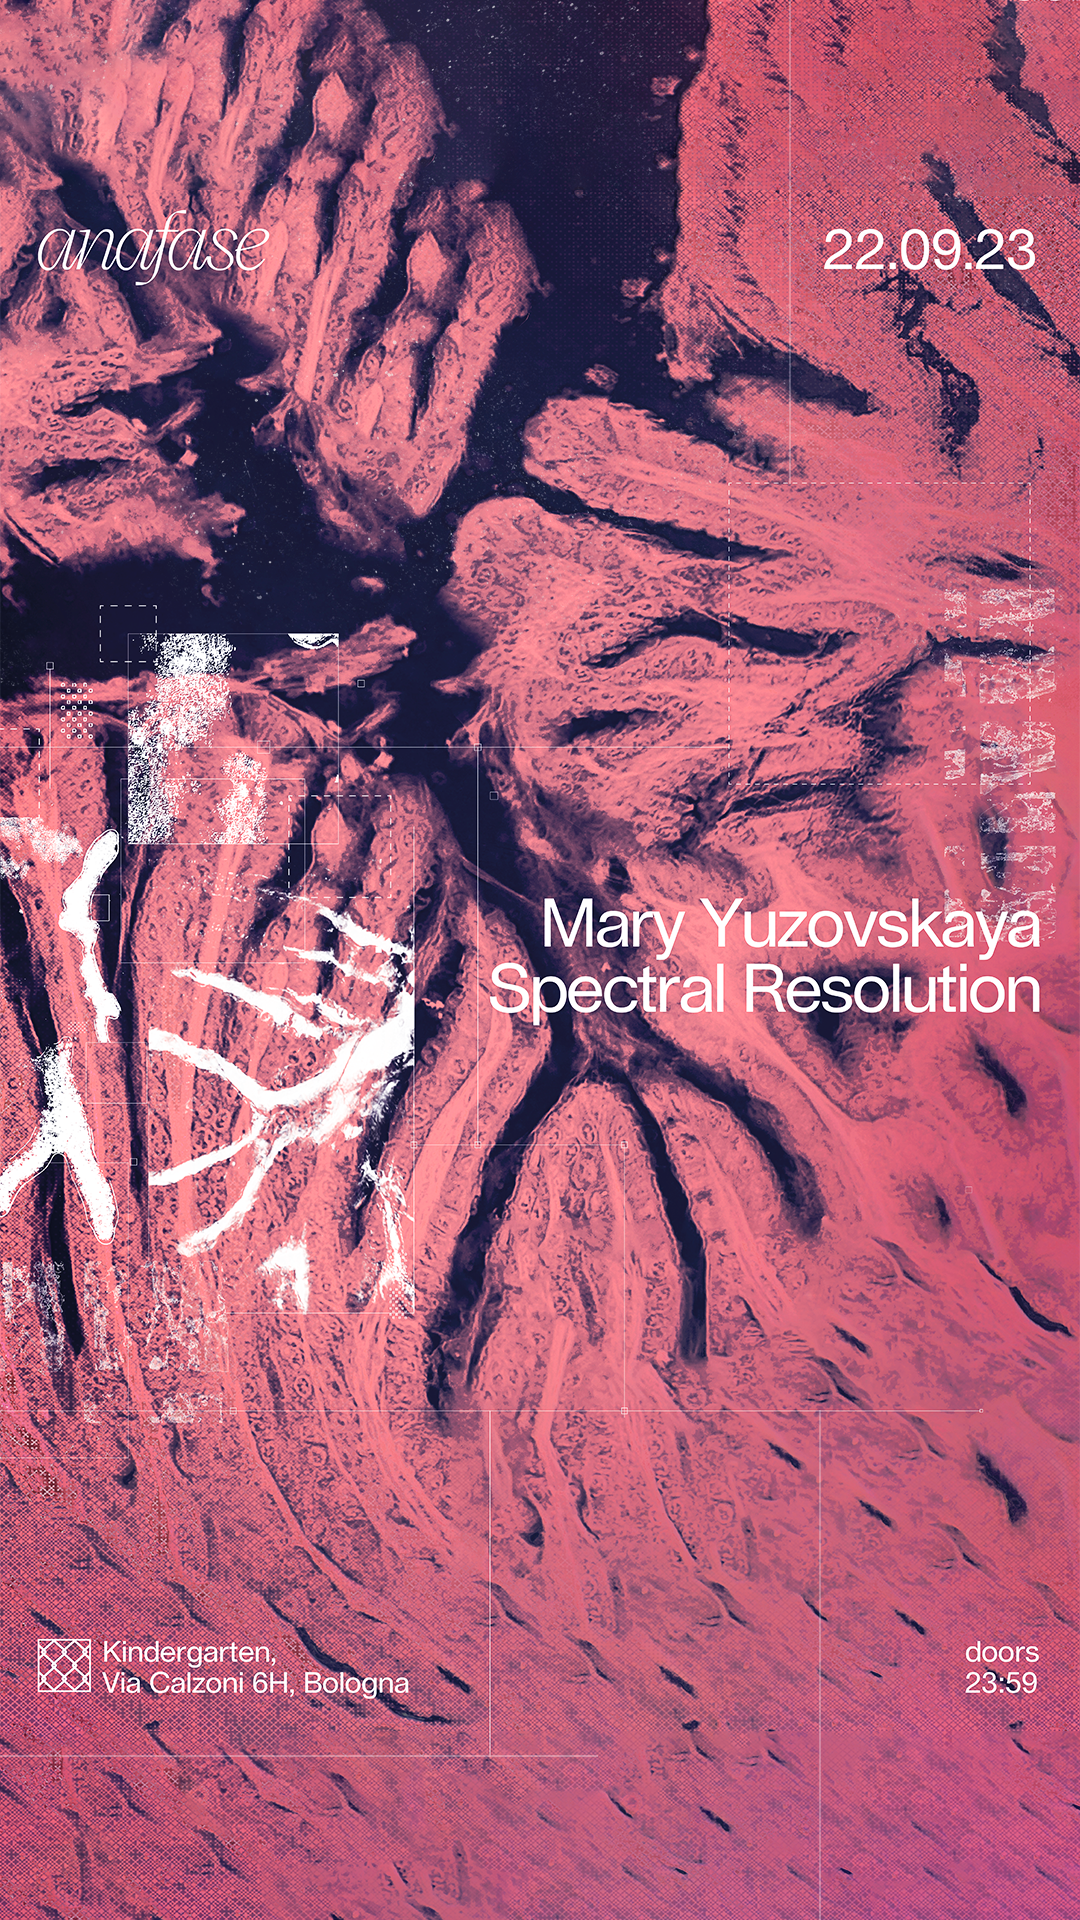 𝘢𝘯𝘢𝘧𝘢𝘴𝘦 with Mary Yuzovskaya, Spectral Resolution - フライヤー表